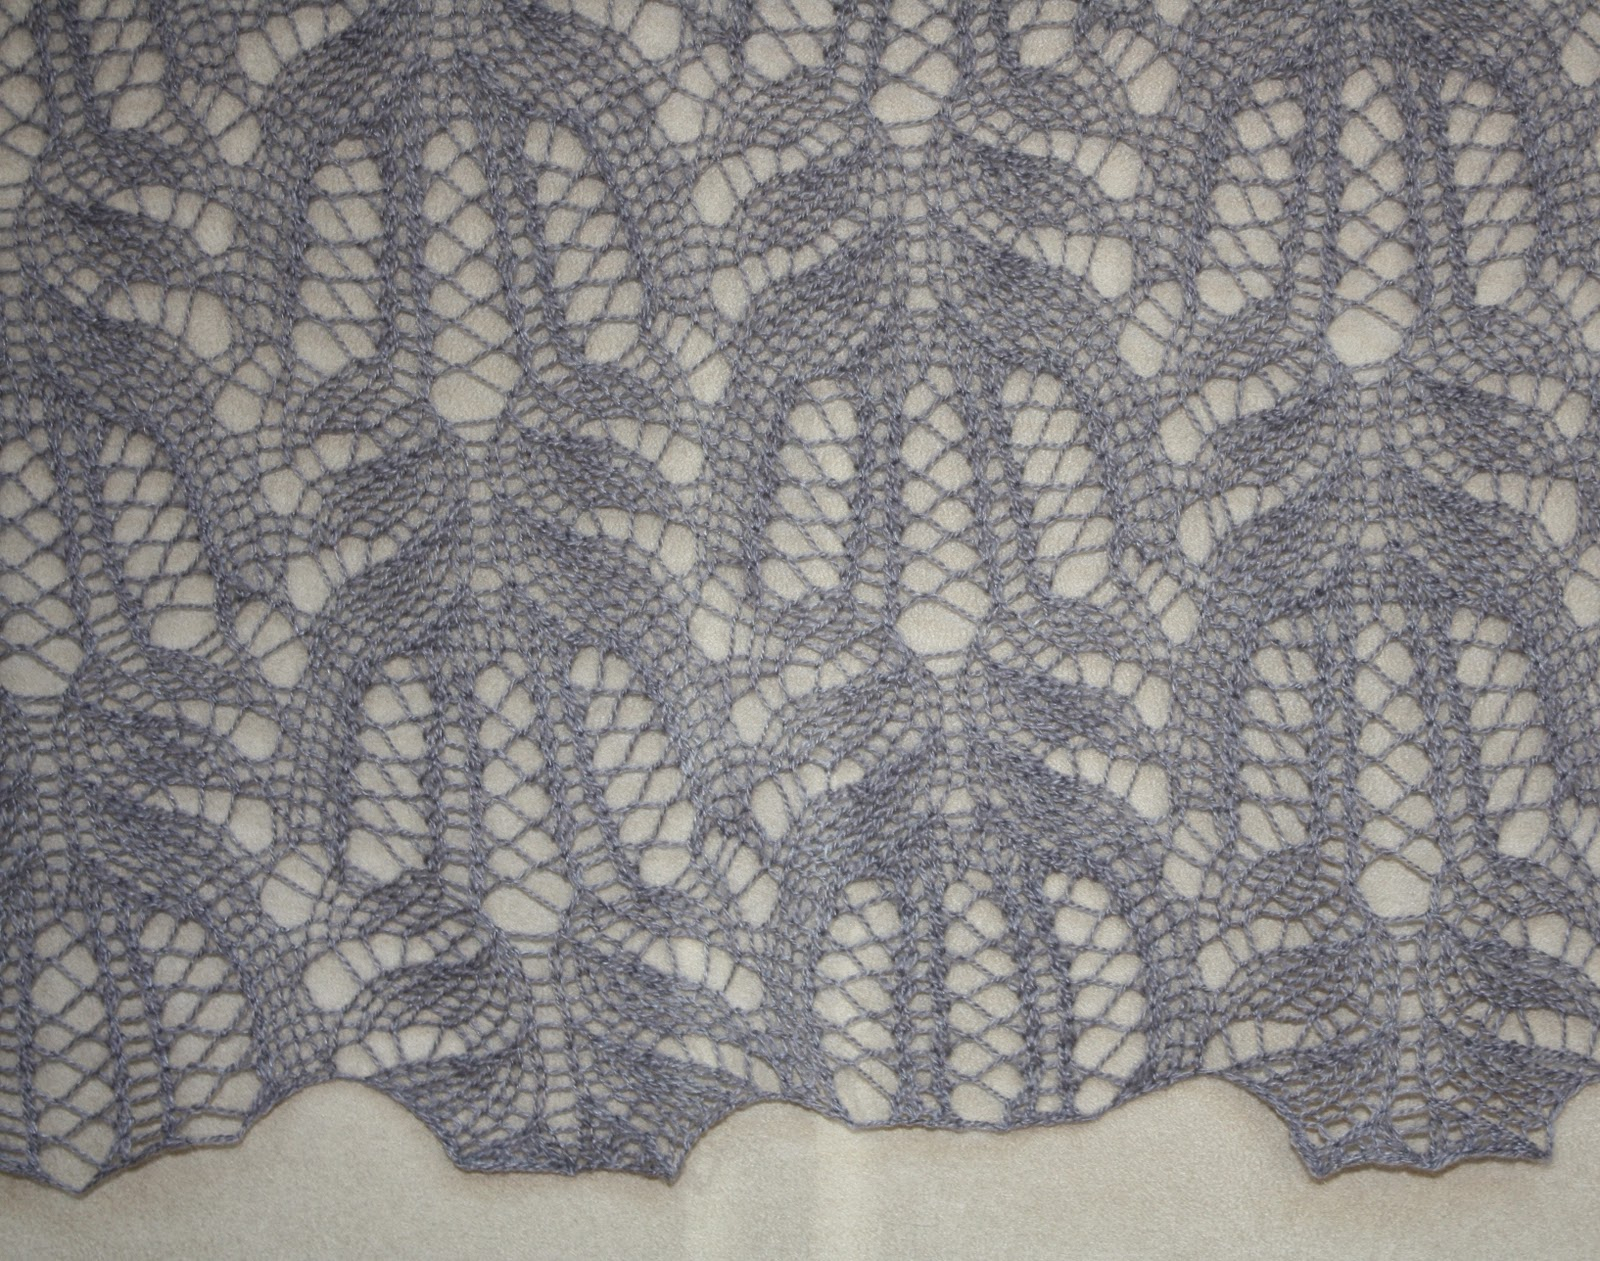 Knitted Lace Pattern All Knitted Lace Frost Flowers Lace Pattern